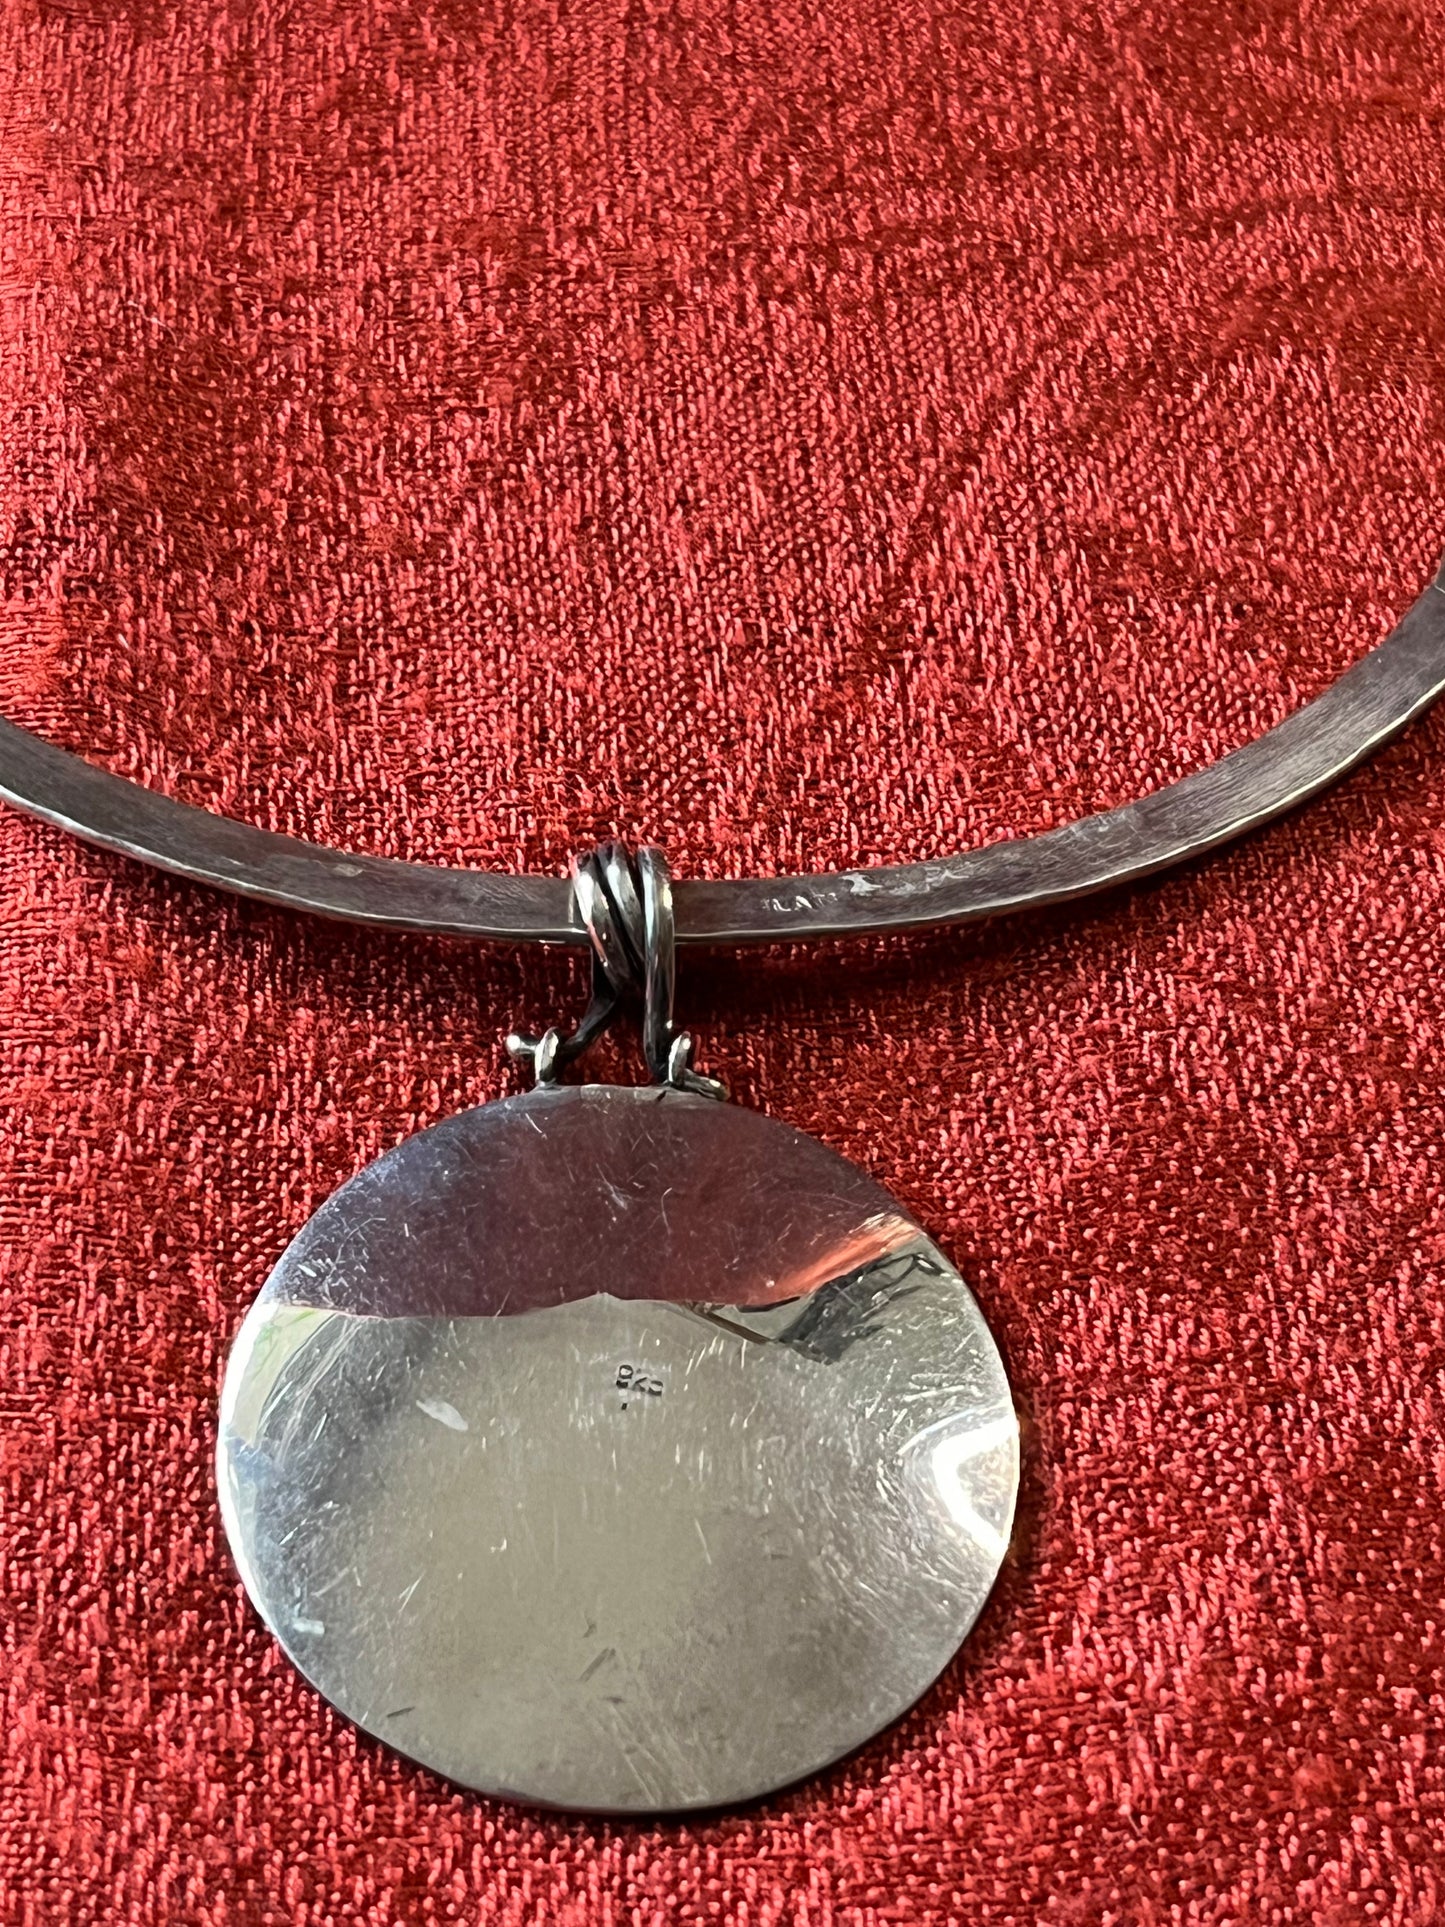 Silver Plate Choker with Handcrafted Sterling Pendant